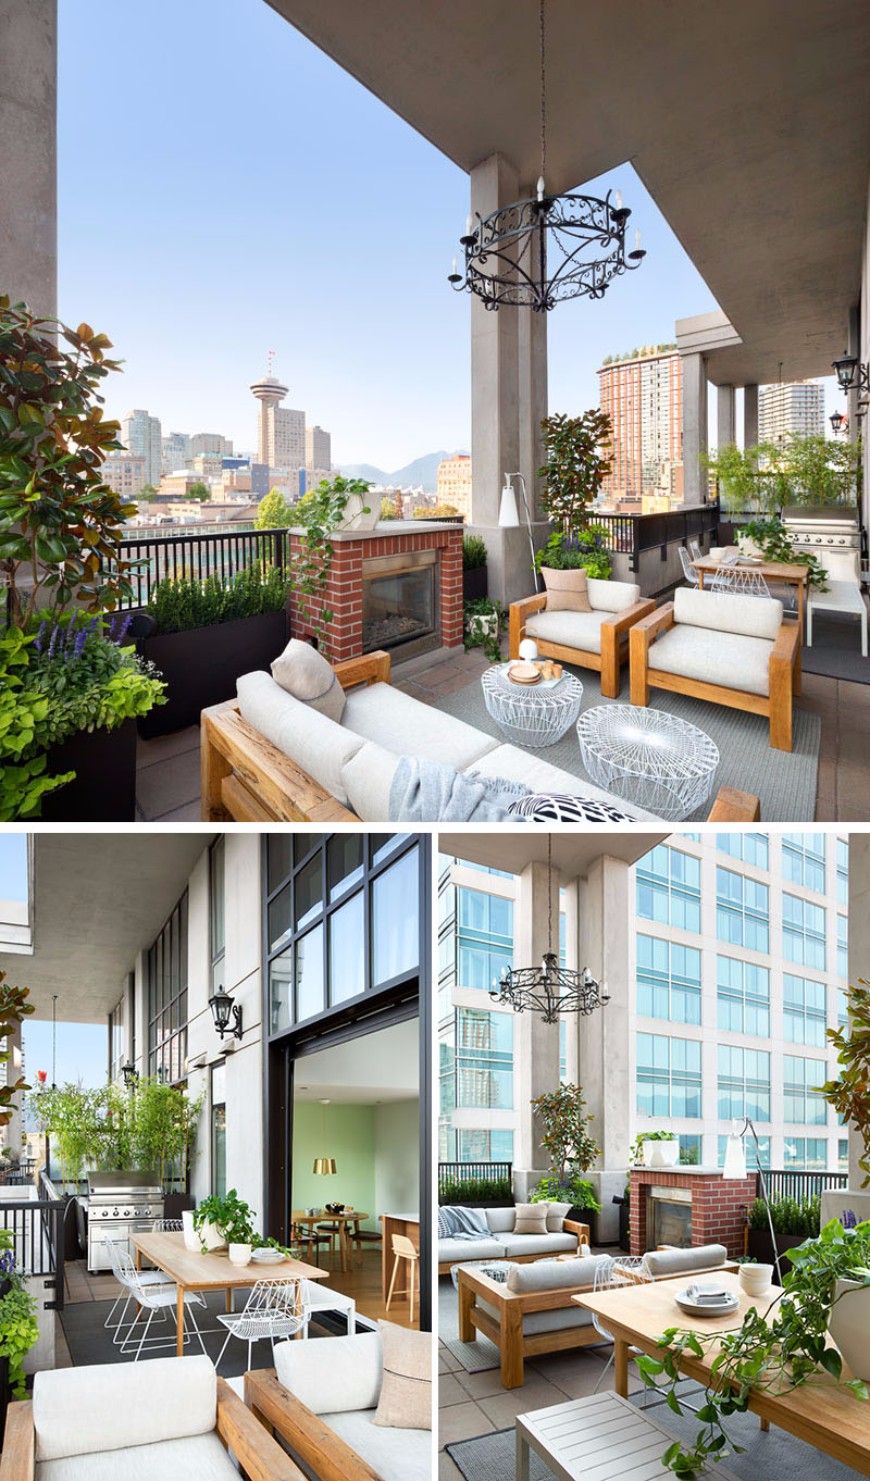 This Loft Apartment in Vancouver is Absolutely Gorgeous!